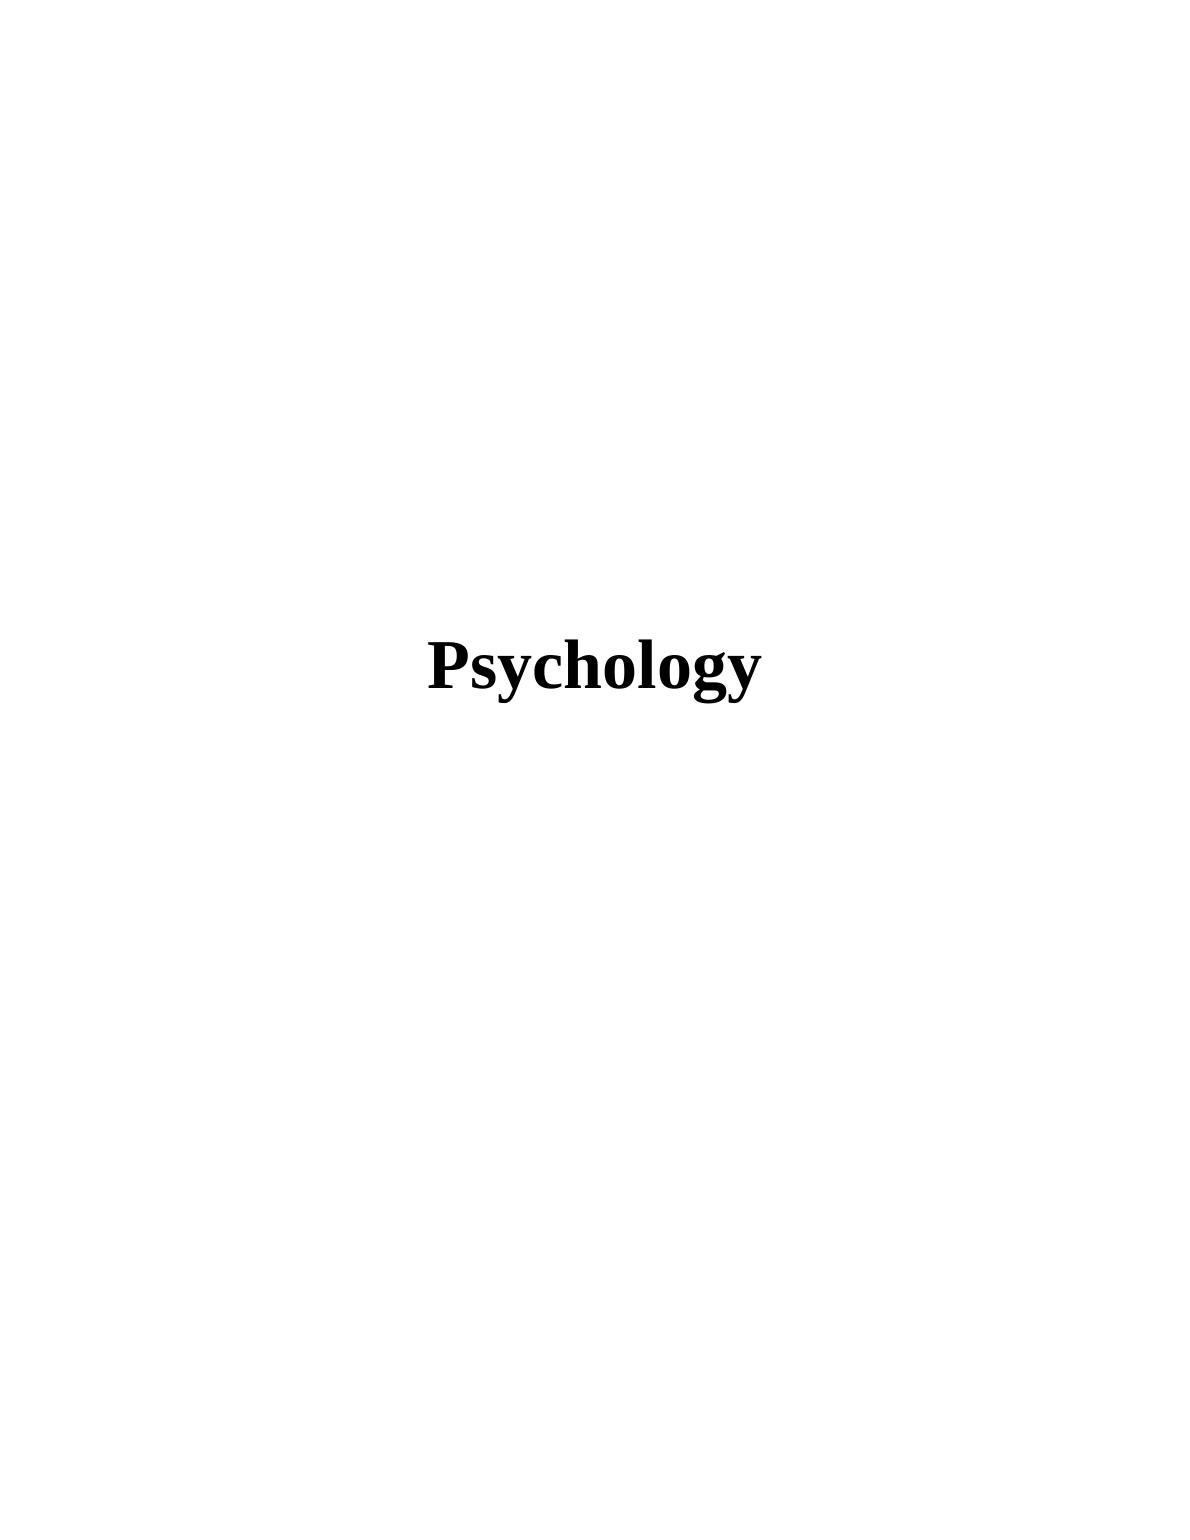 Psychology Assignment Sample (Doc)_1